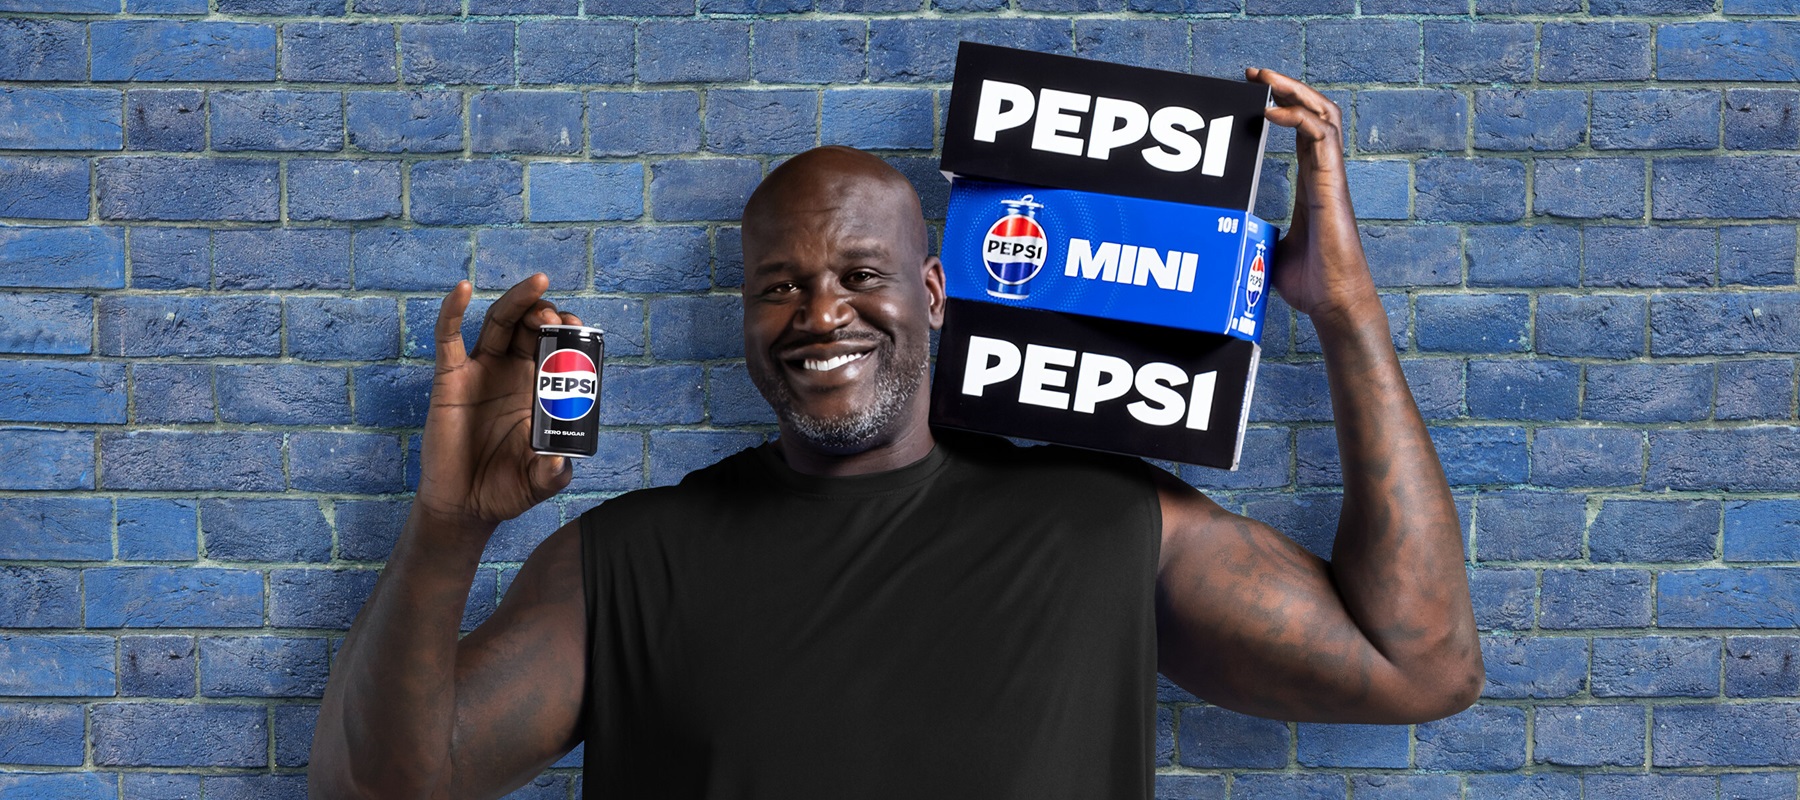 Pepsi reunites with Shaquille O'Neal in new mini cans commercial